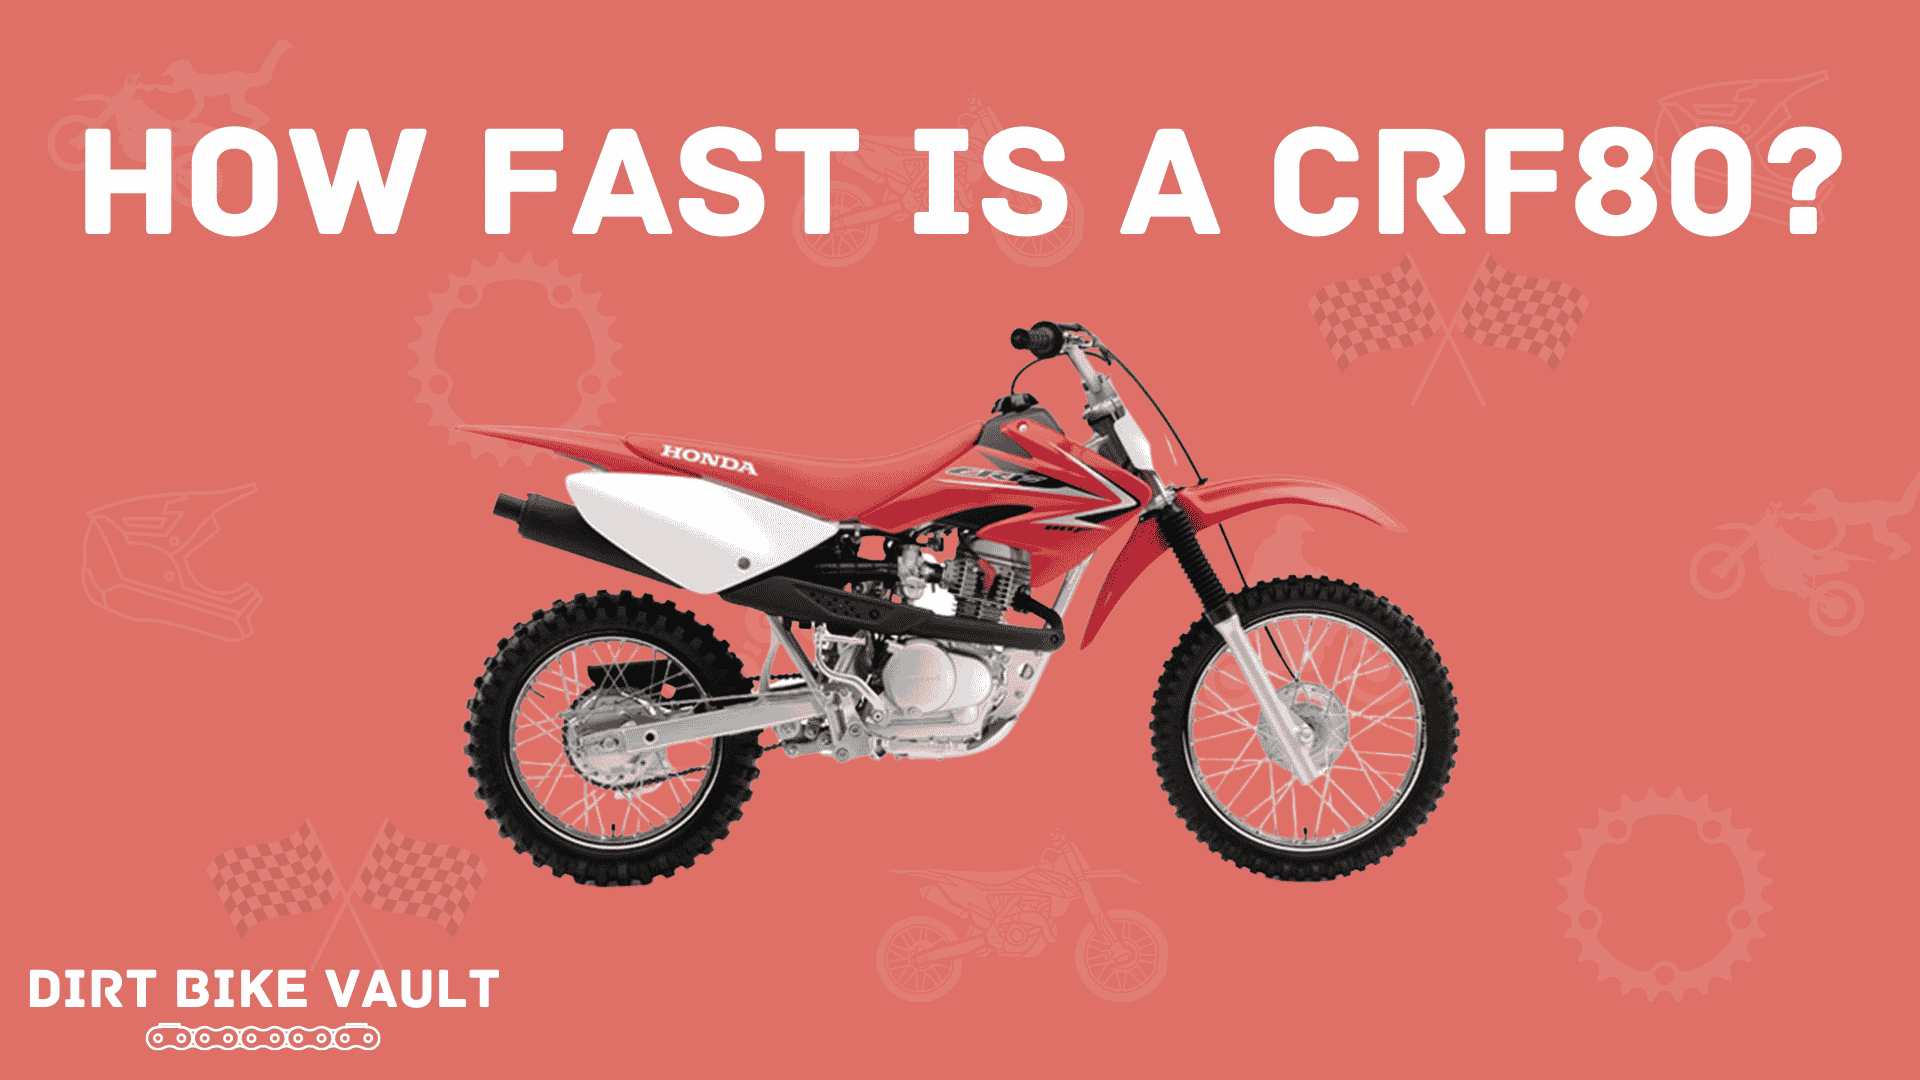 how fast is a CRF80 in white text on red background with Honda CRF80 dirt bike image